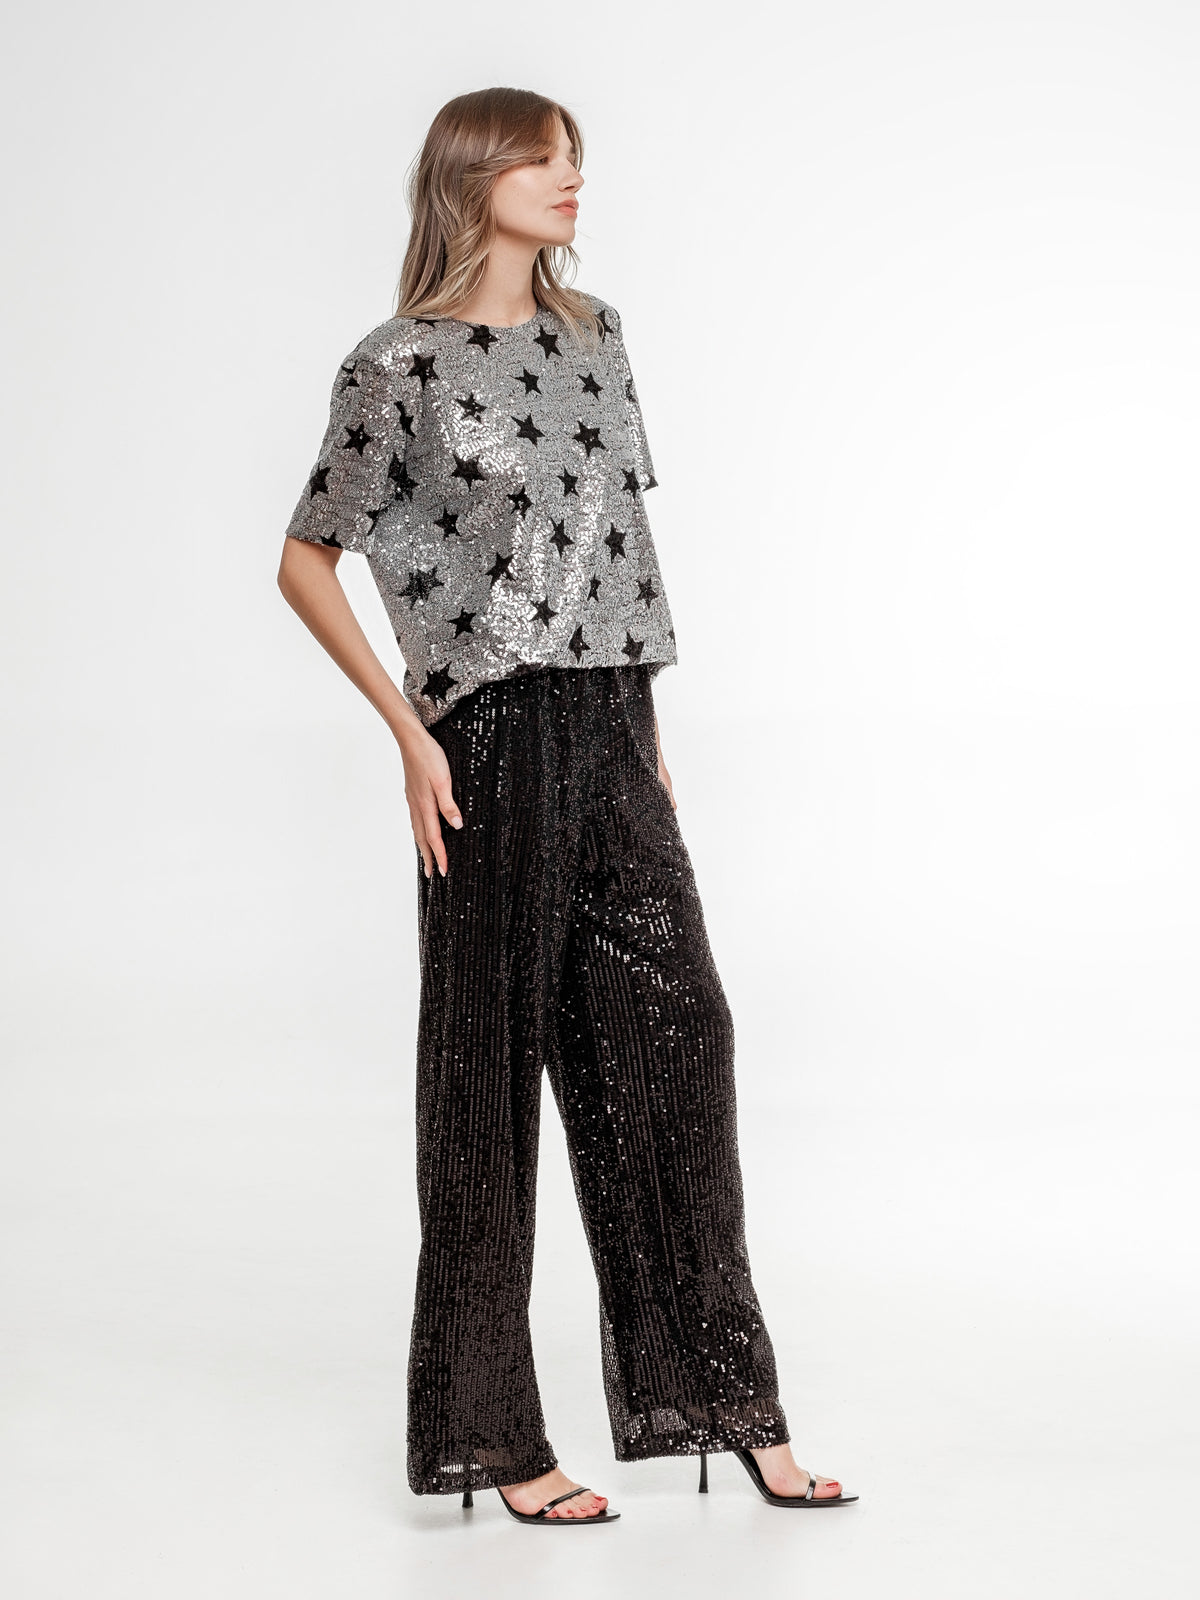 silver glitter top with stars and black glitter wide pants side view